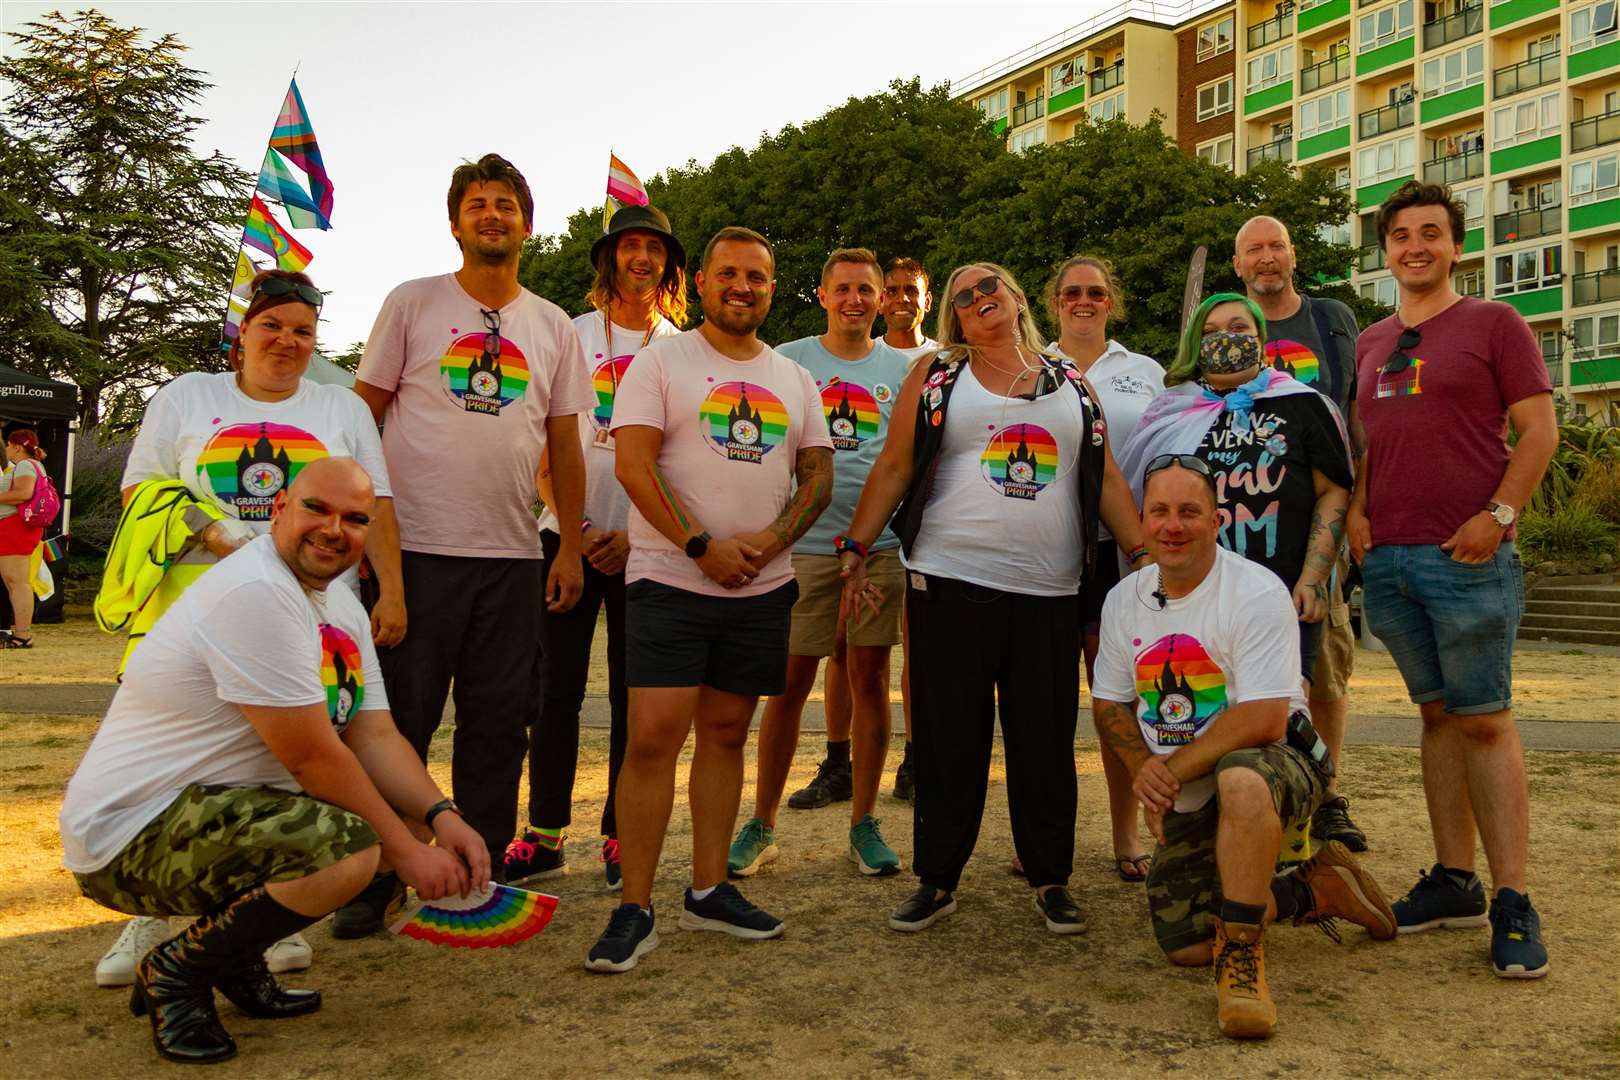 Gravesham Pride committee and volunteers. Picture: Ben Archell